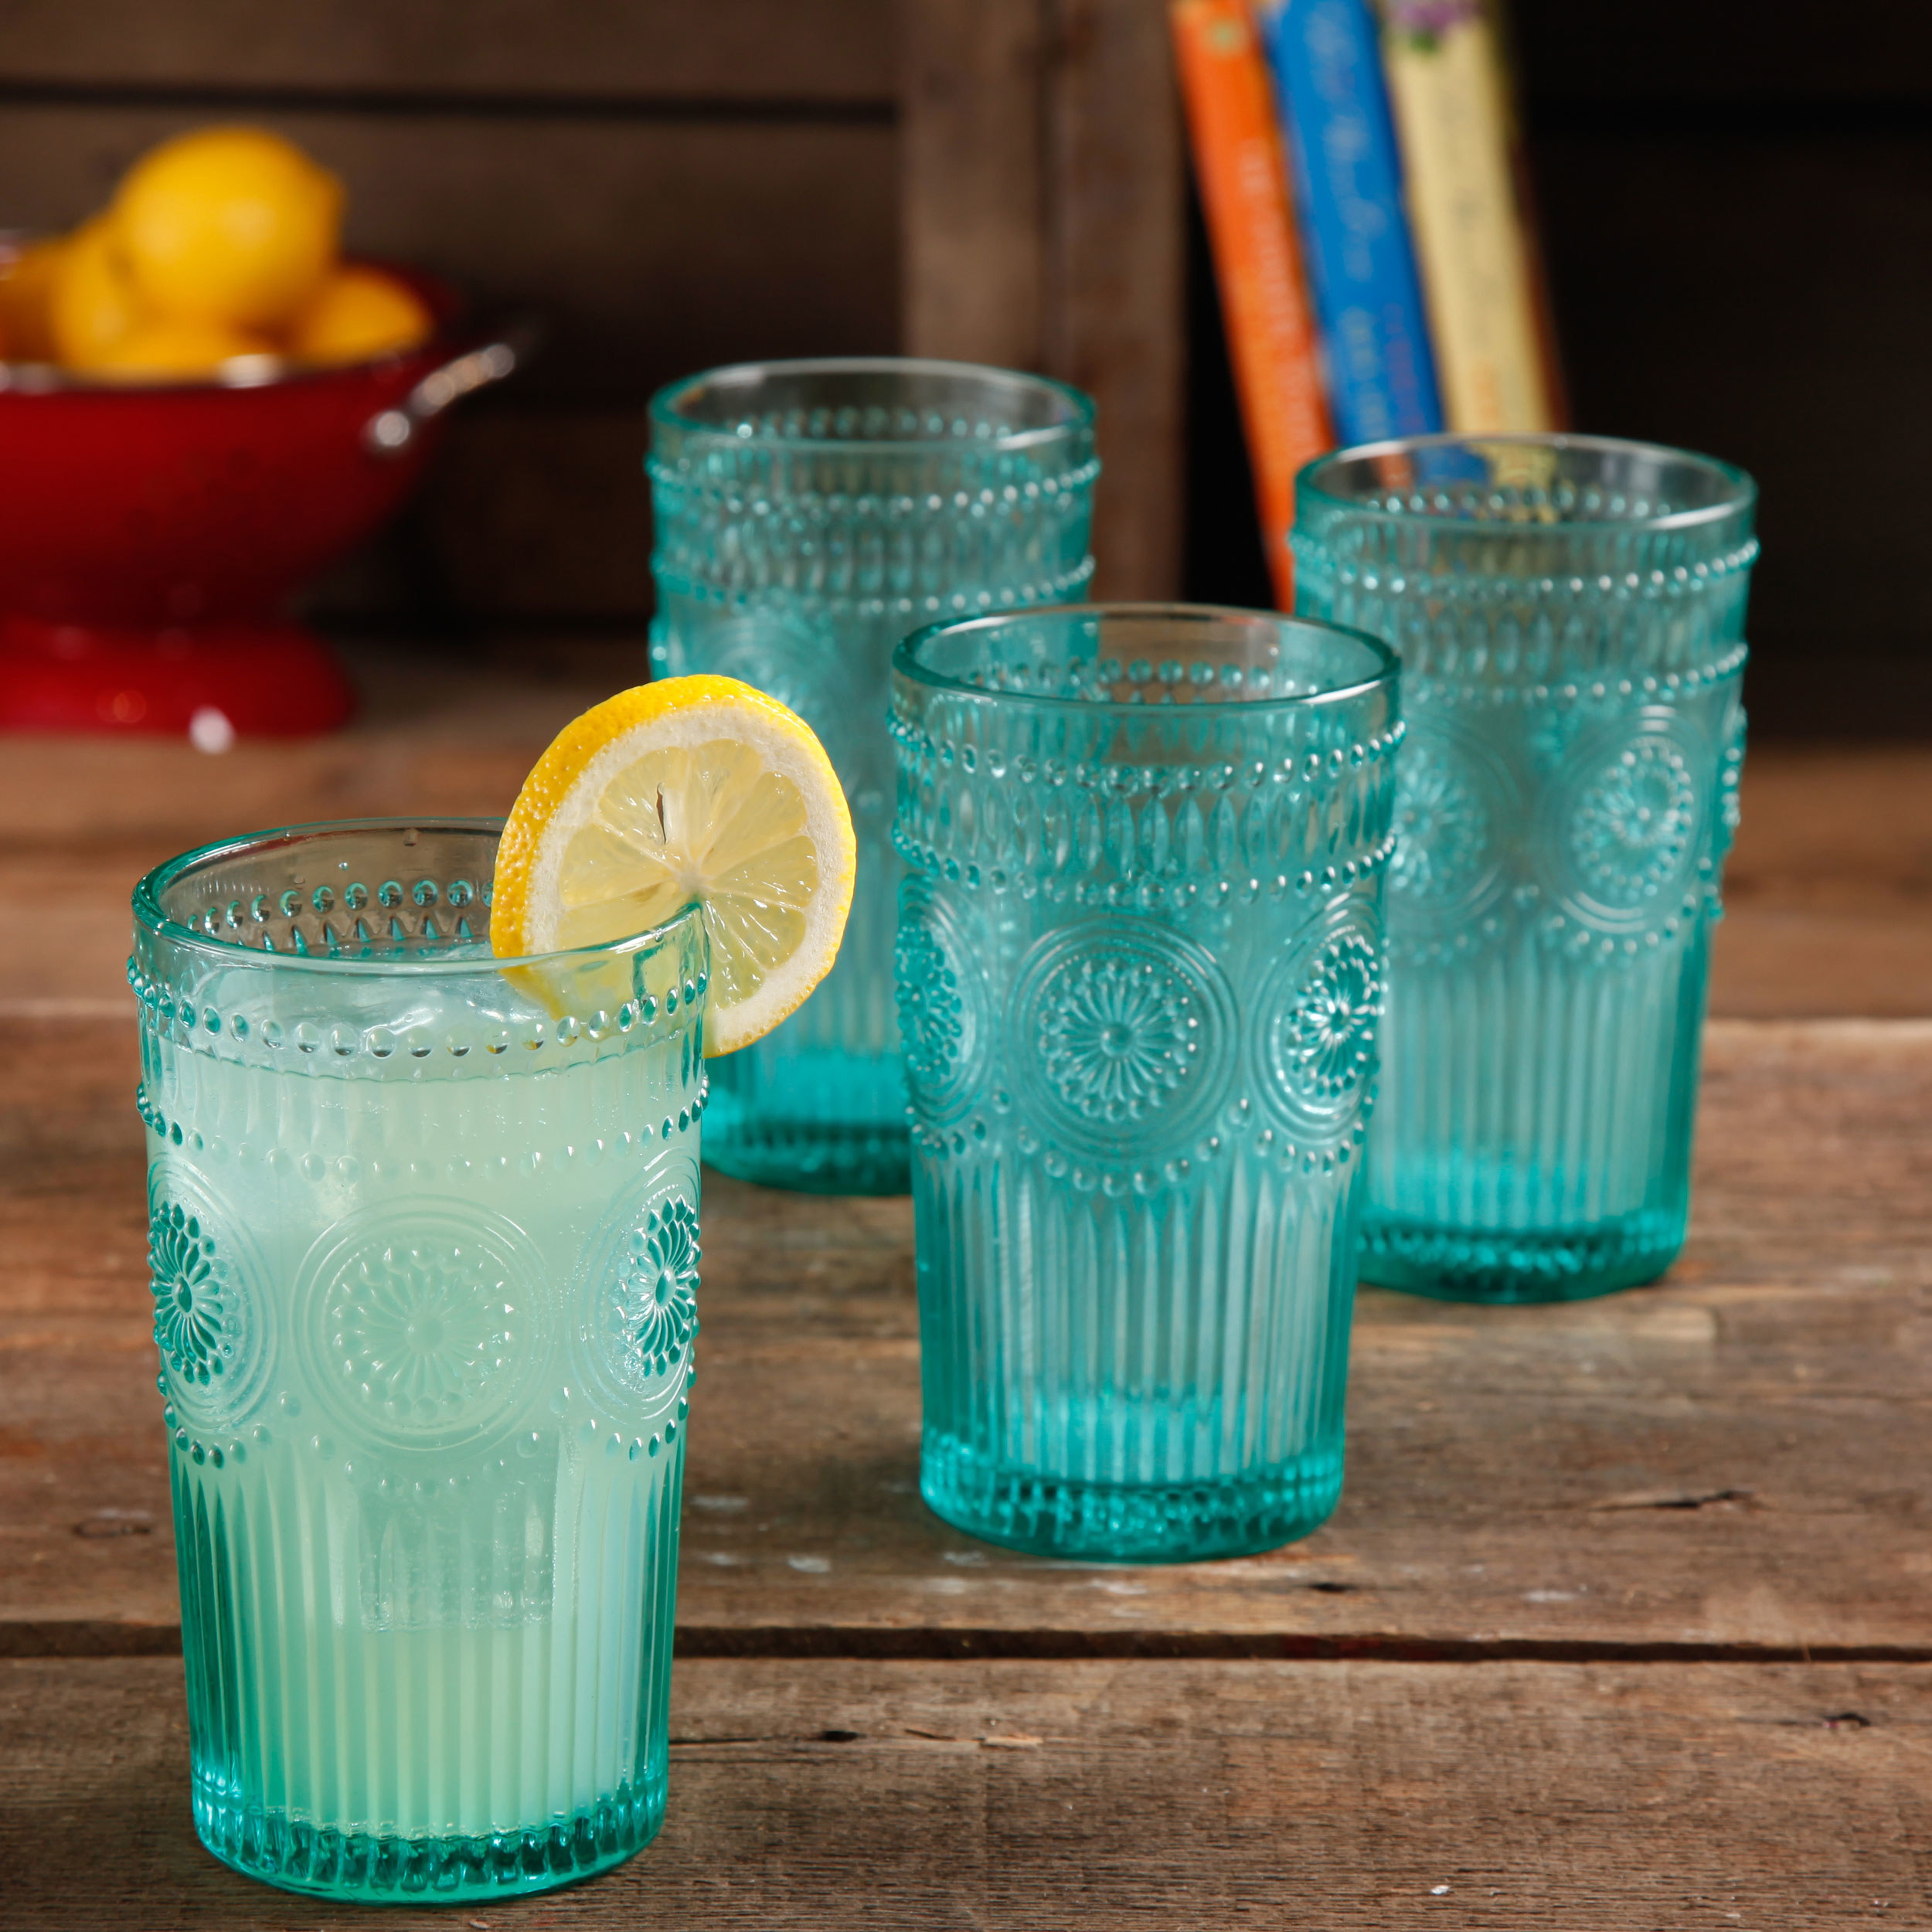 An image of a set of four blue embossed 16-ounce glass tumblers